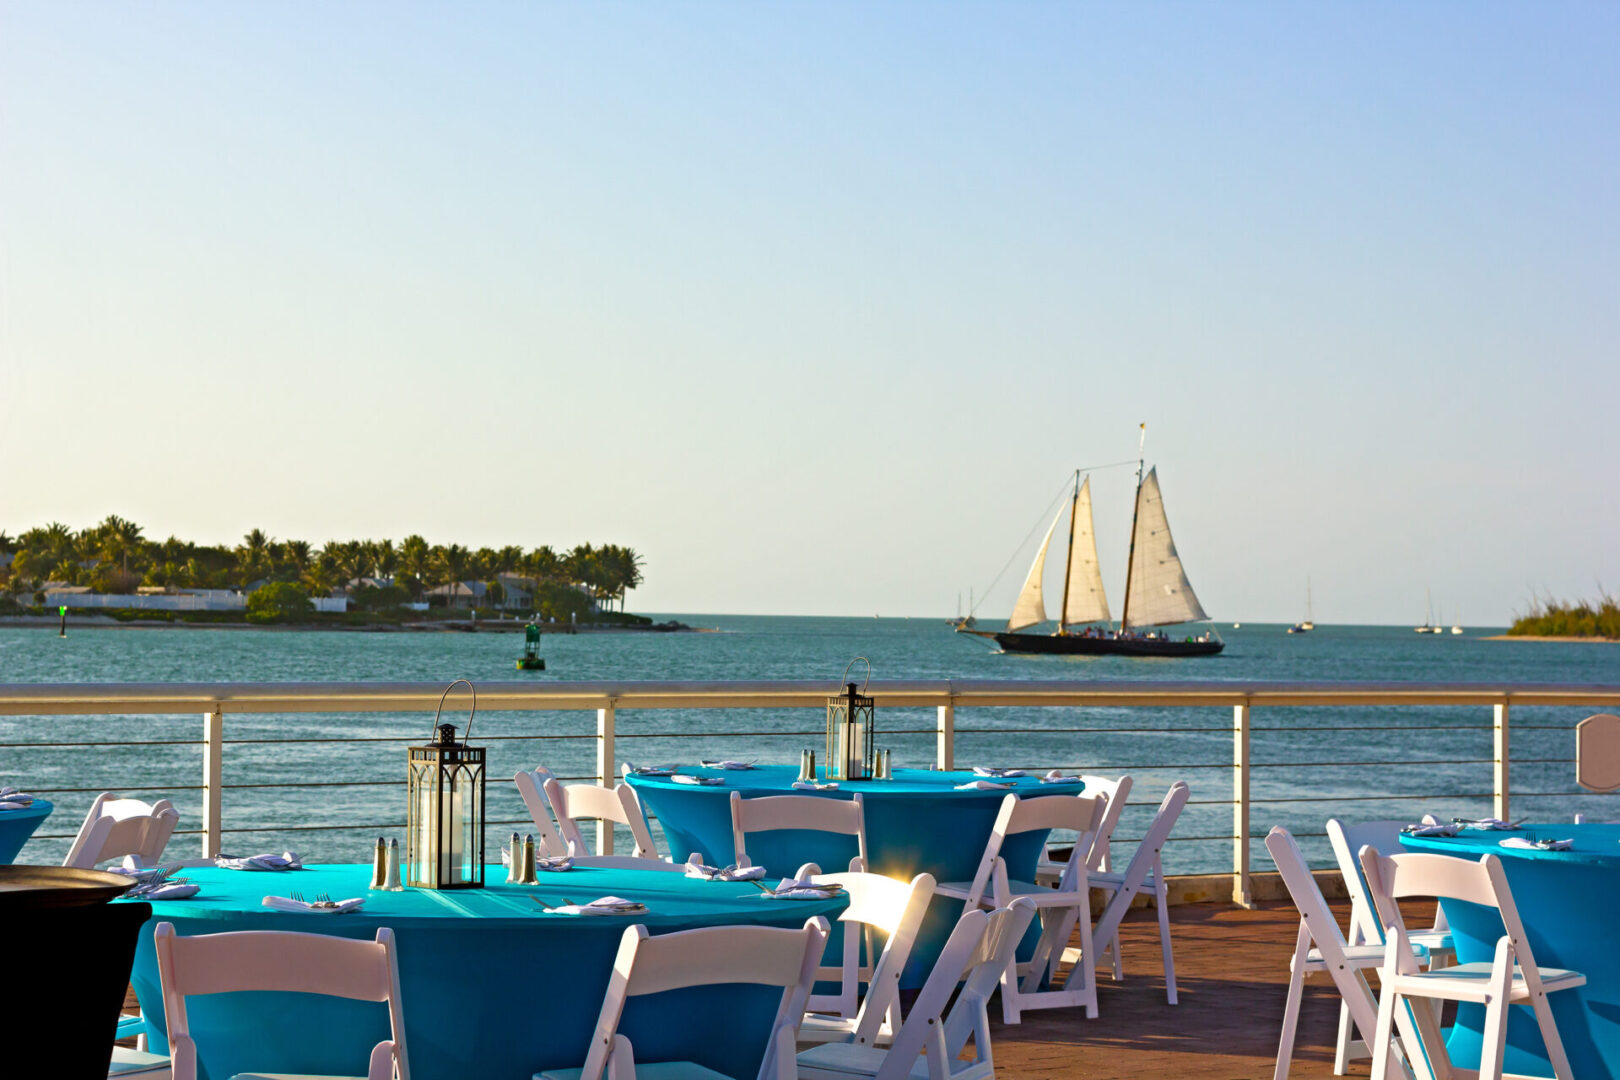 Sunset at Key West waterfront. A sea view of dining area with sailboat passing by.